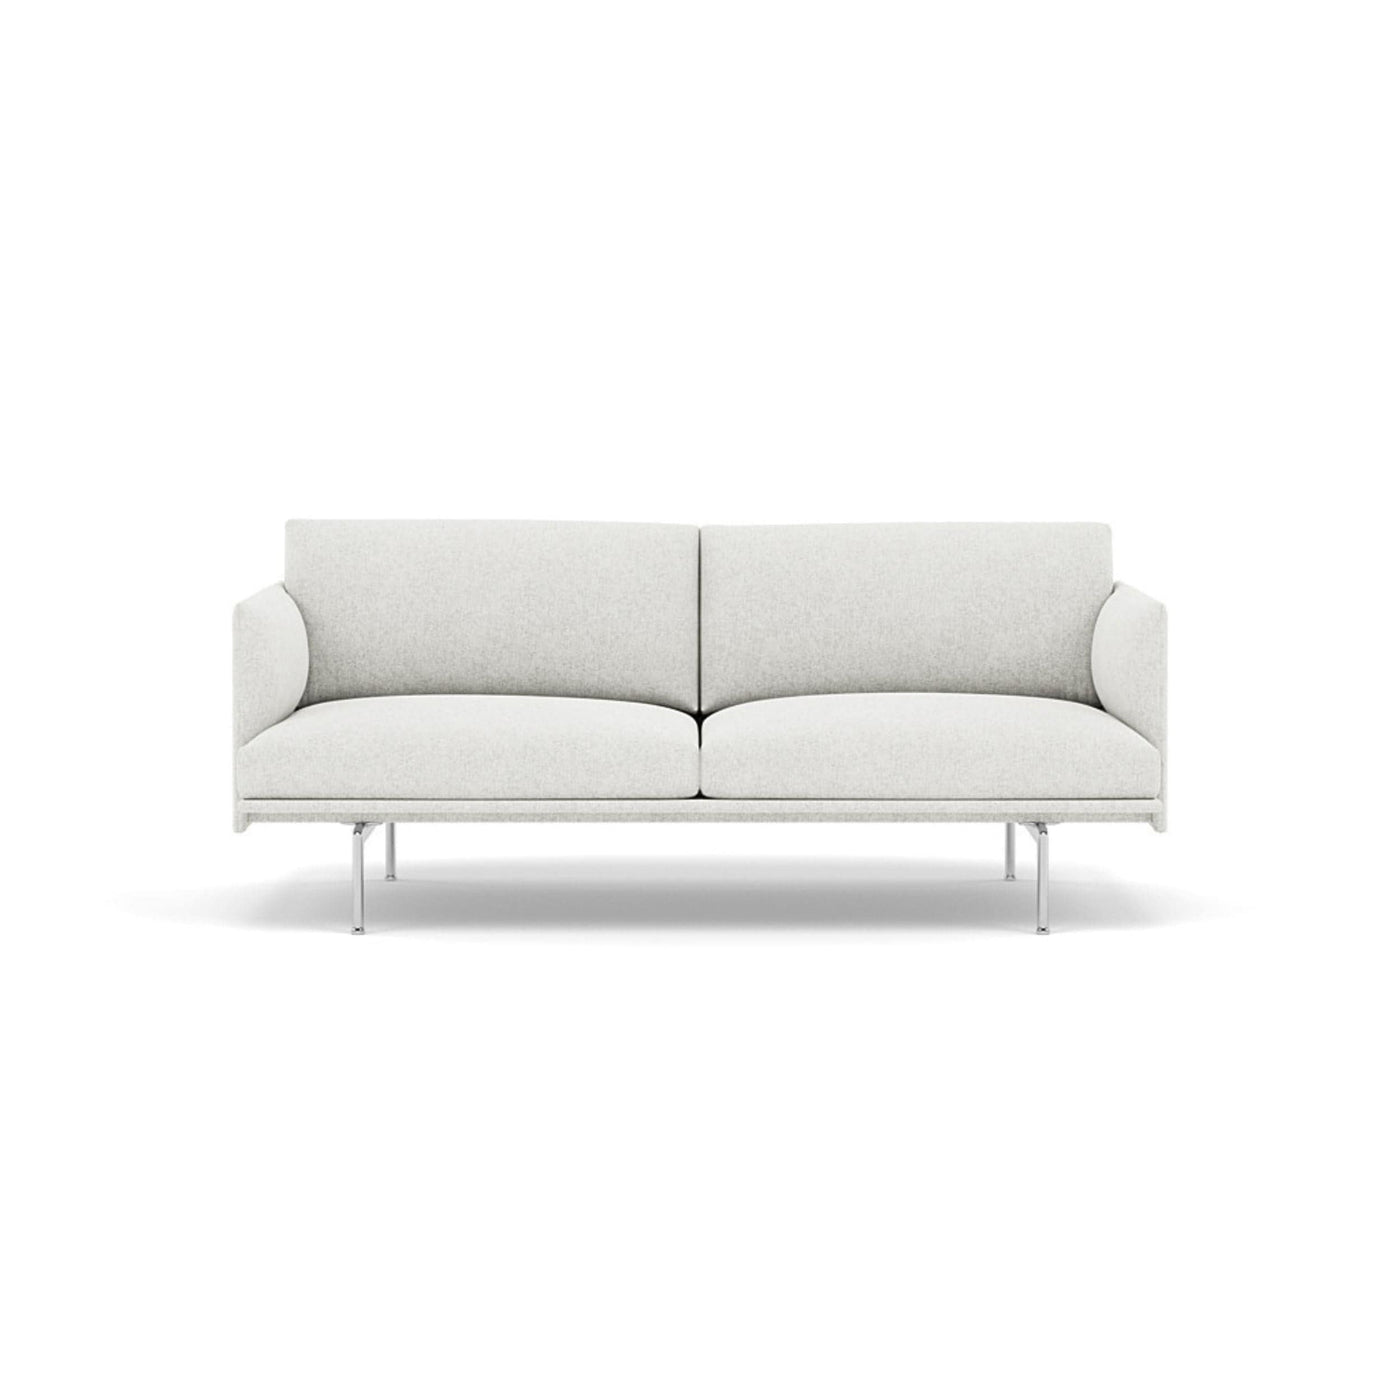 Muuto Outline Studio Sofa 170 in hallingdal 110 and polished aluminium legs. Made to order from someday designs. #colour_hallingdal-110-grey